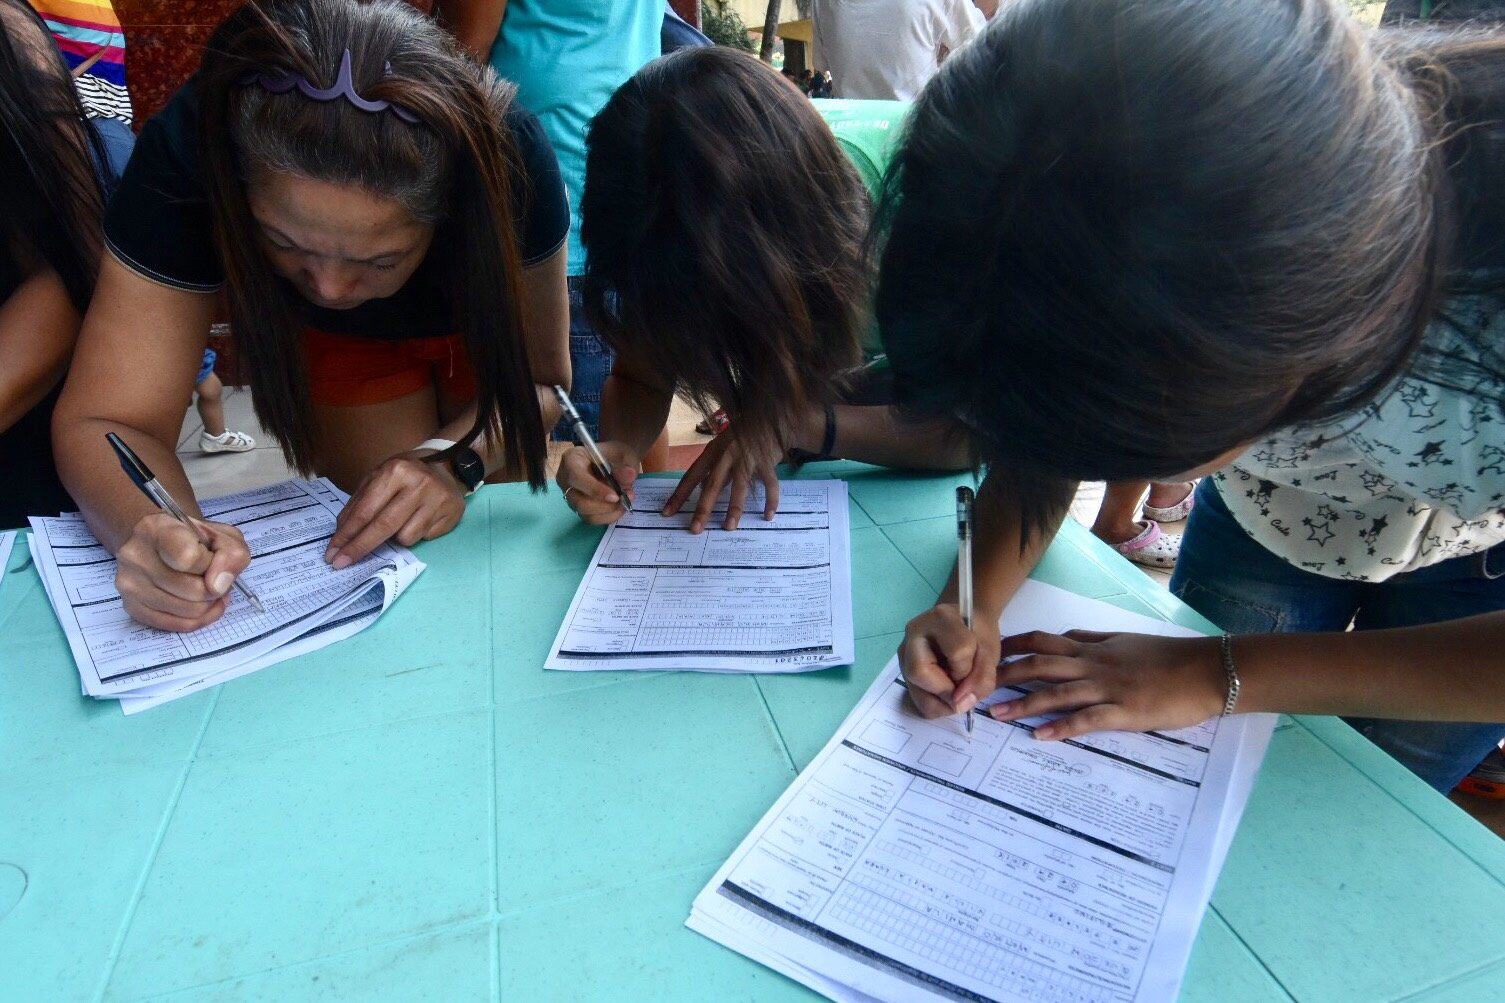 More than 2.5M register as new voters, exceeding Comelec target